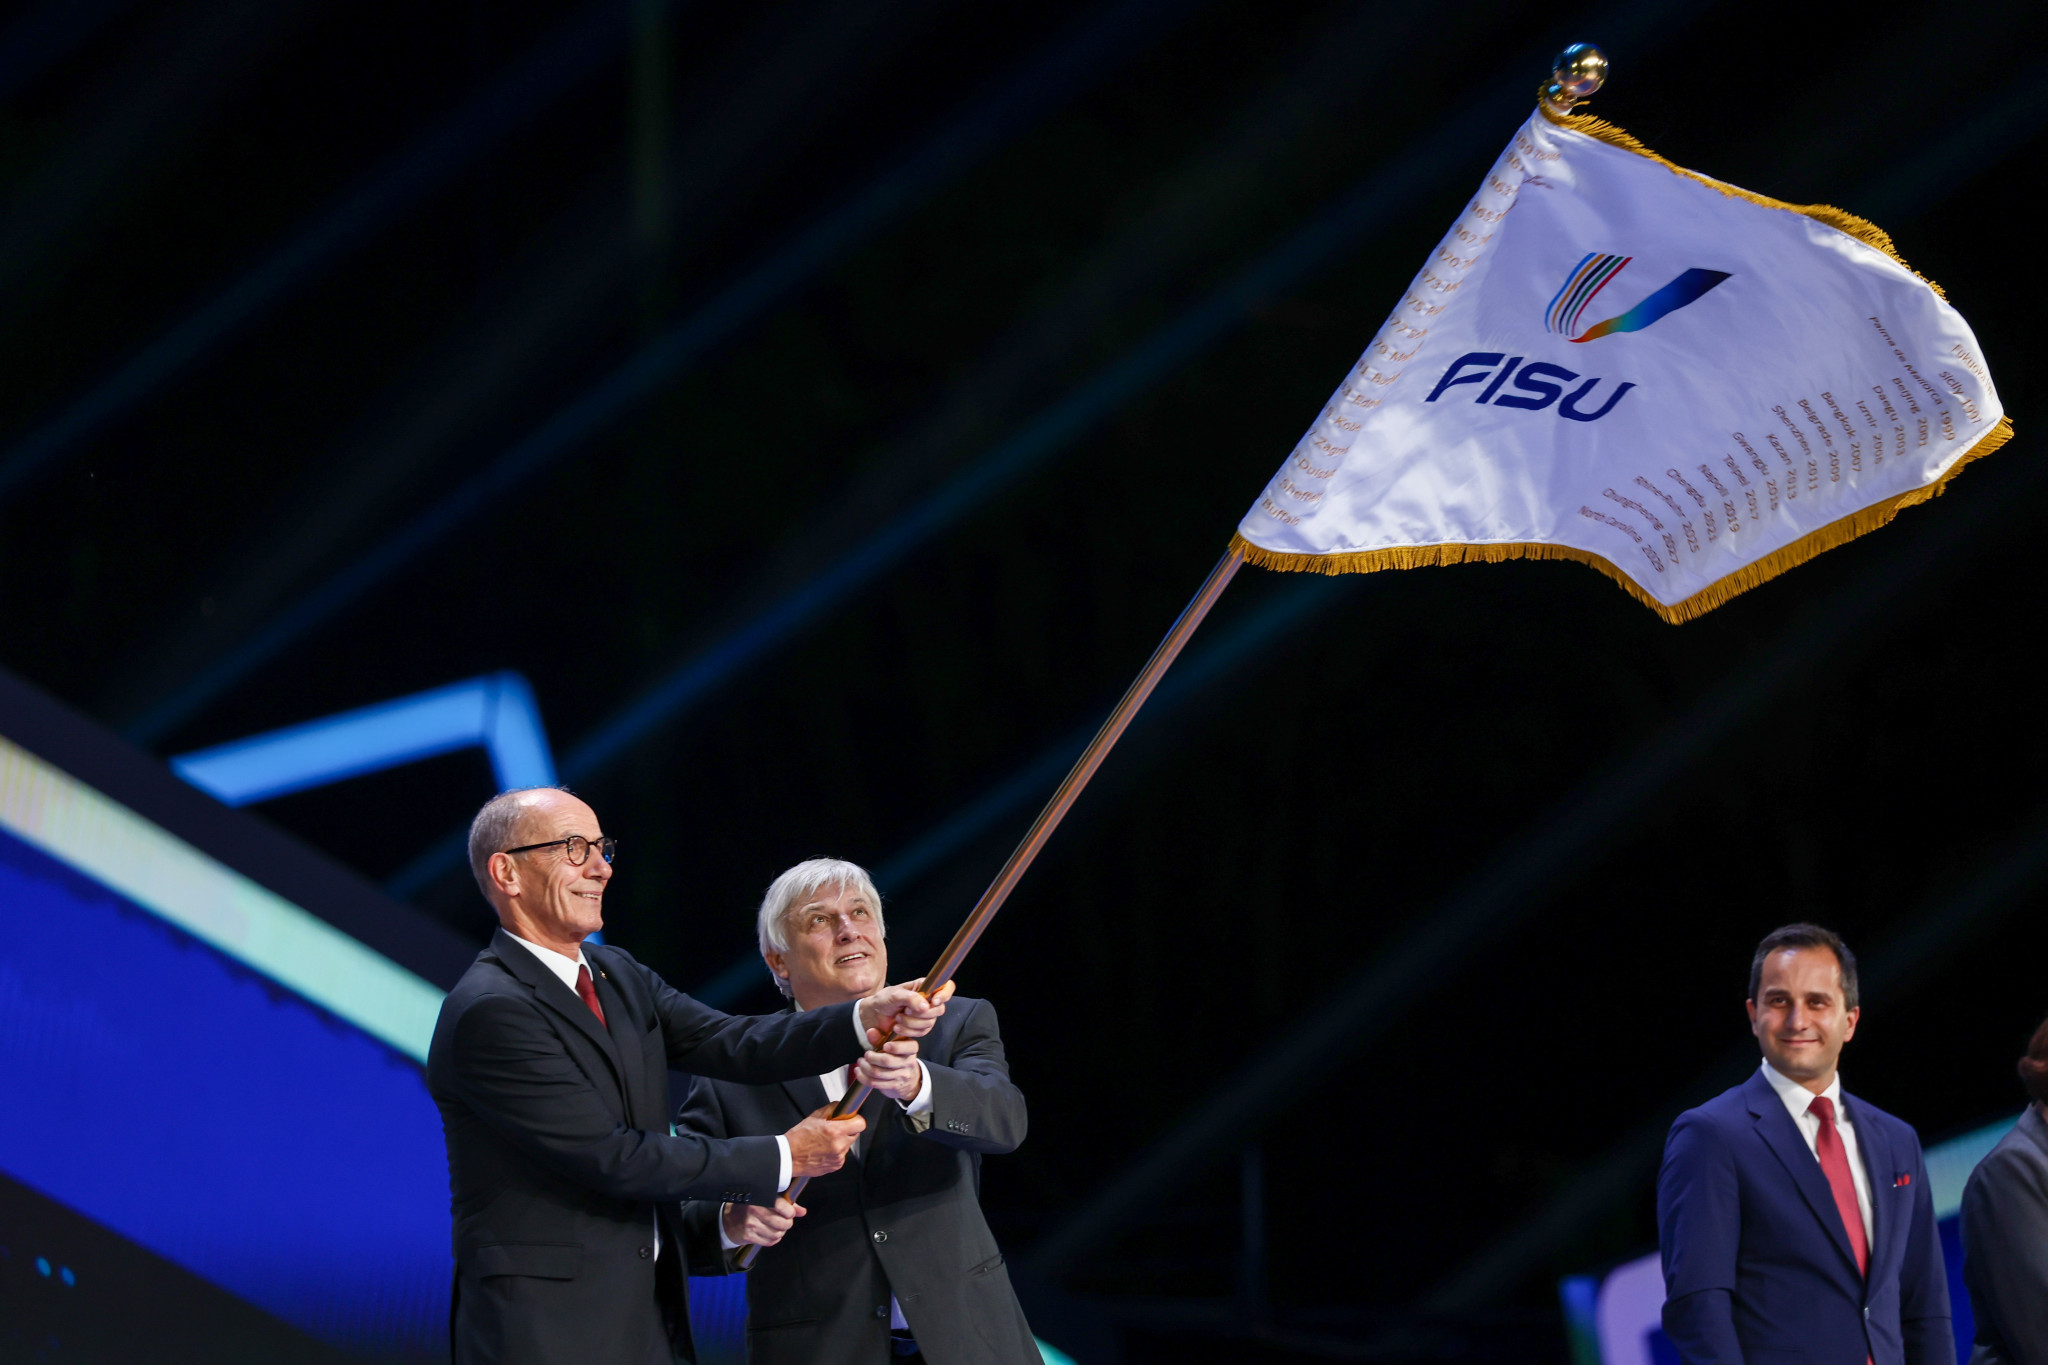 Mahmut Özdemir, right, member of the German Bundestag, watches on as he prepares to receive the FISU flag from FISU Acting President Leonz Eder and chief executive and secretary general Eric Saintrond ©Chengdu 2021